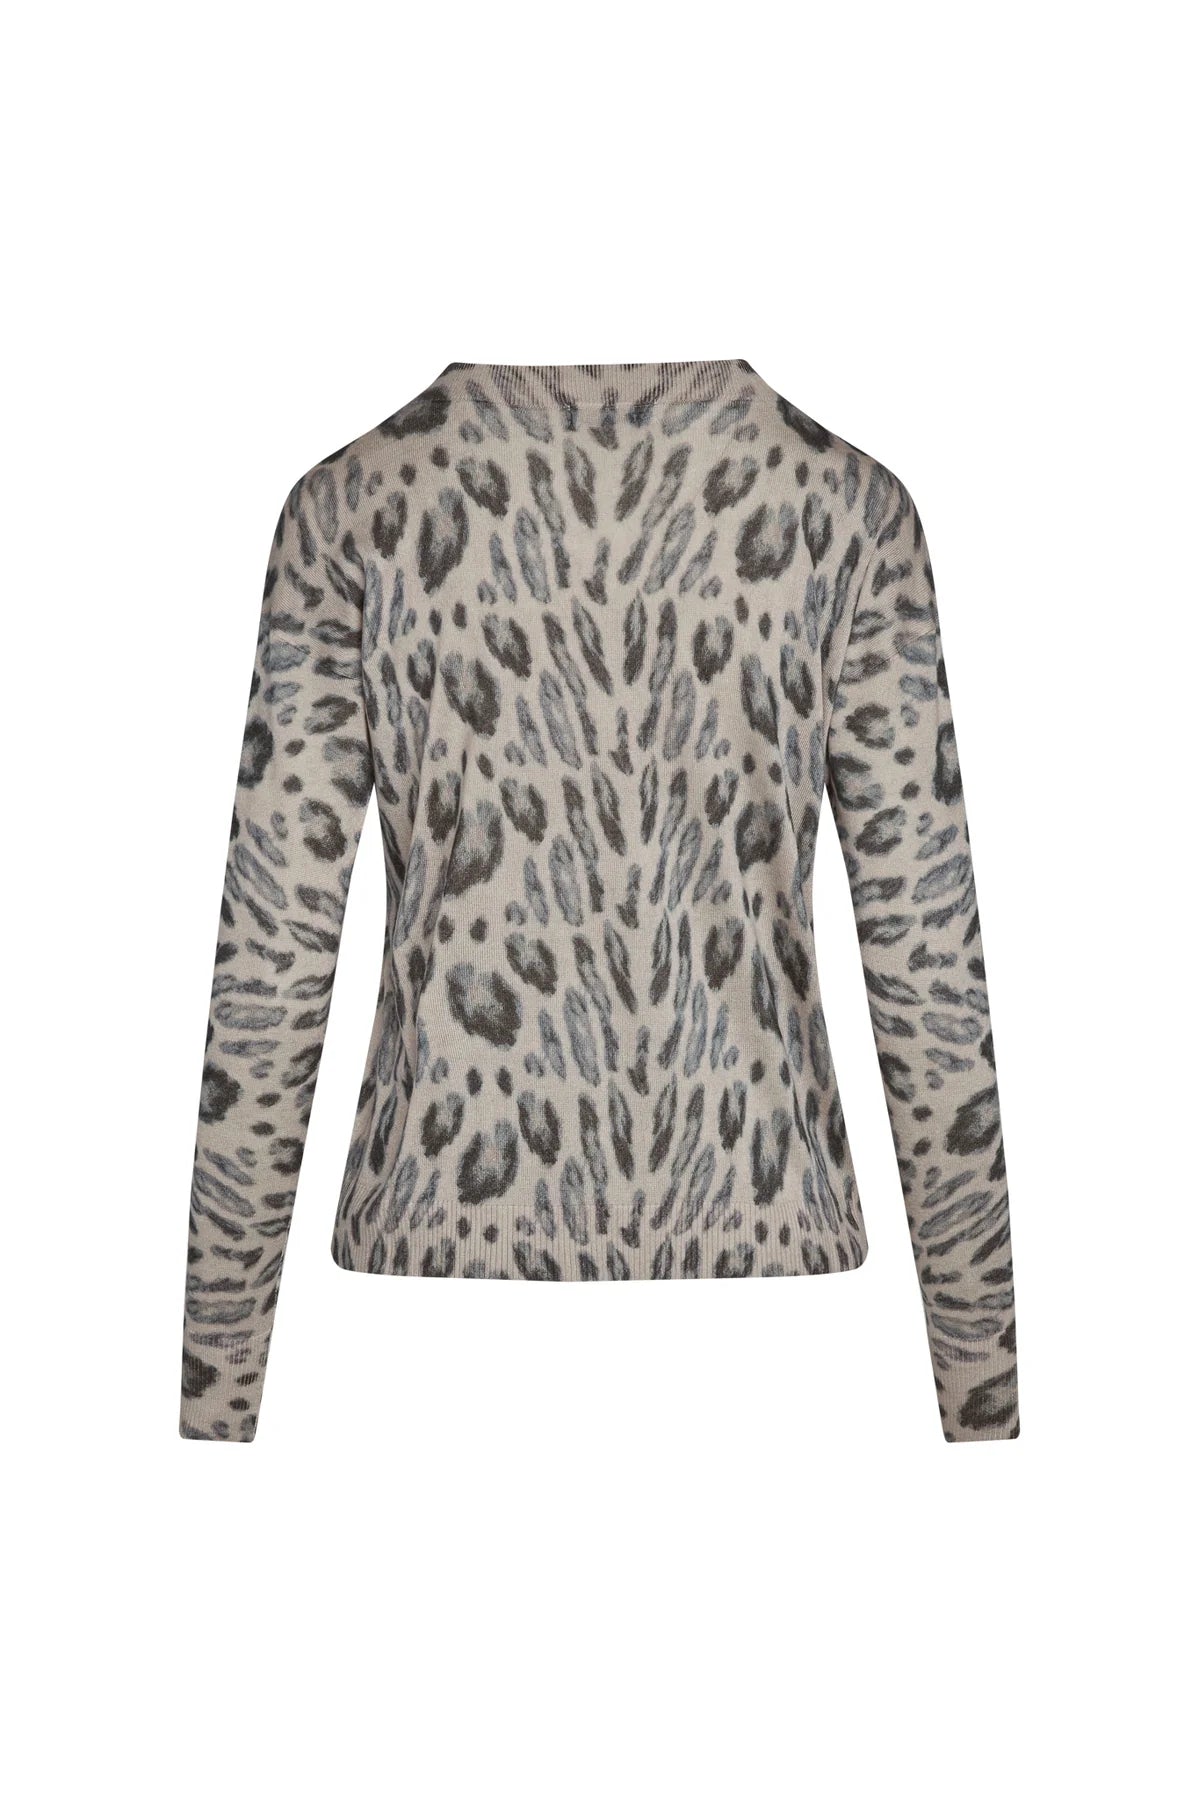 Catherine Gee - V-Neck Silk Cashmere Sweater - New Leopard